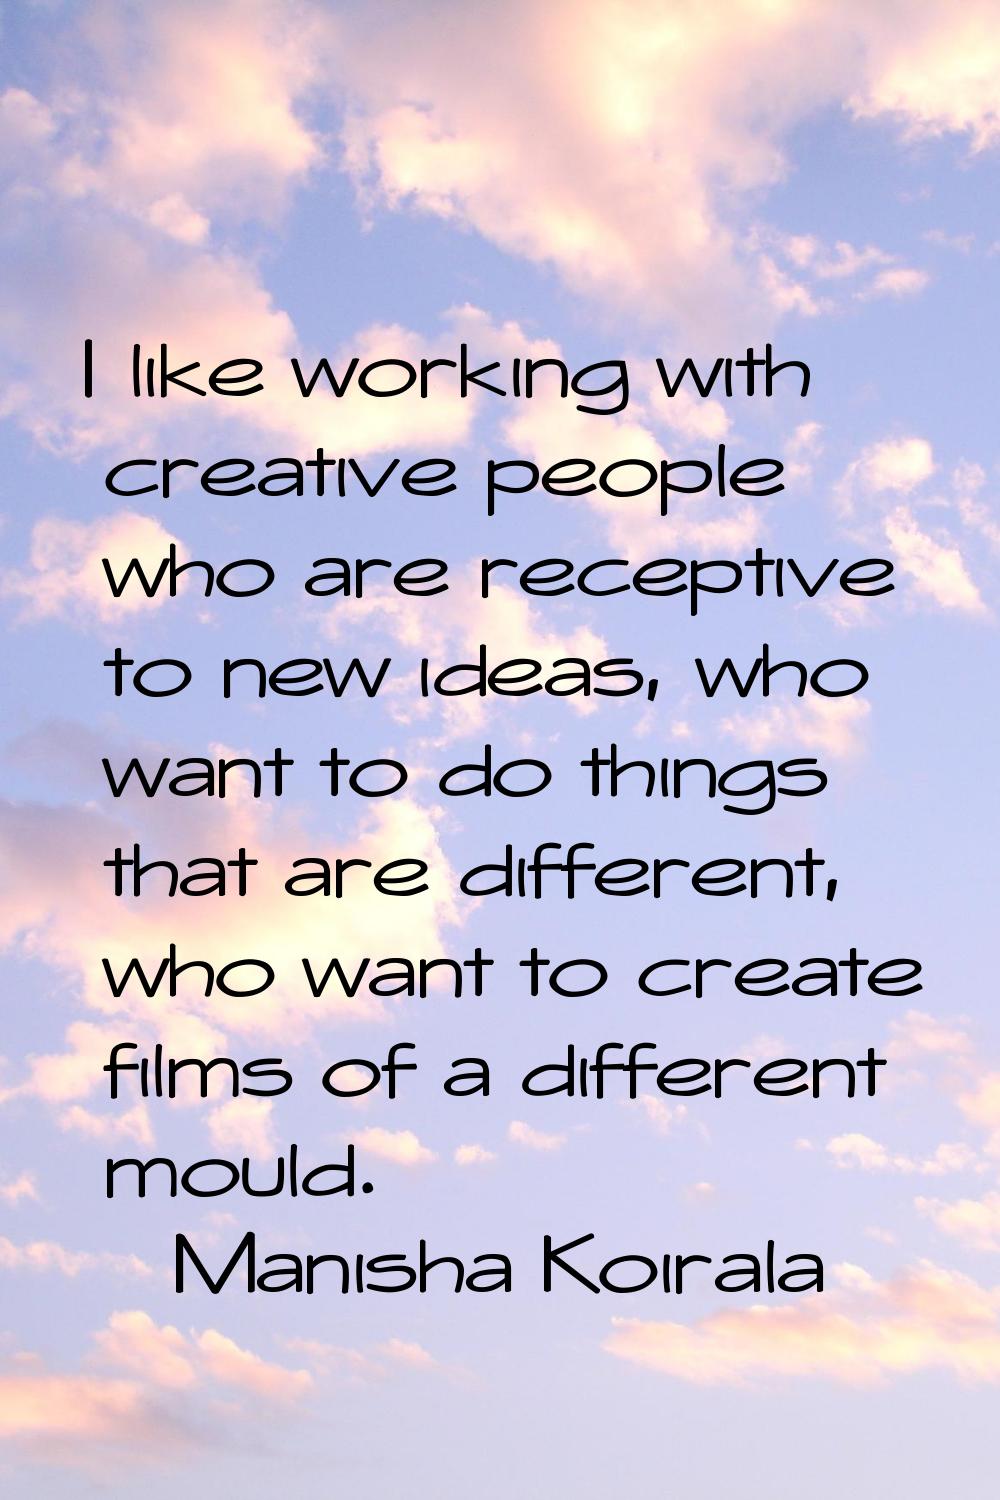 I like working with creative people who are receptive to new ideas, who want to do things that are 